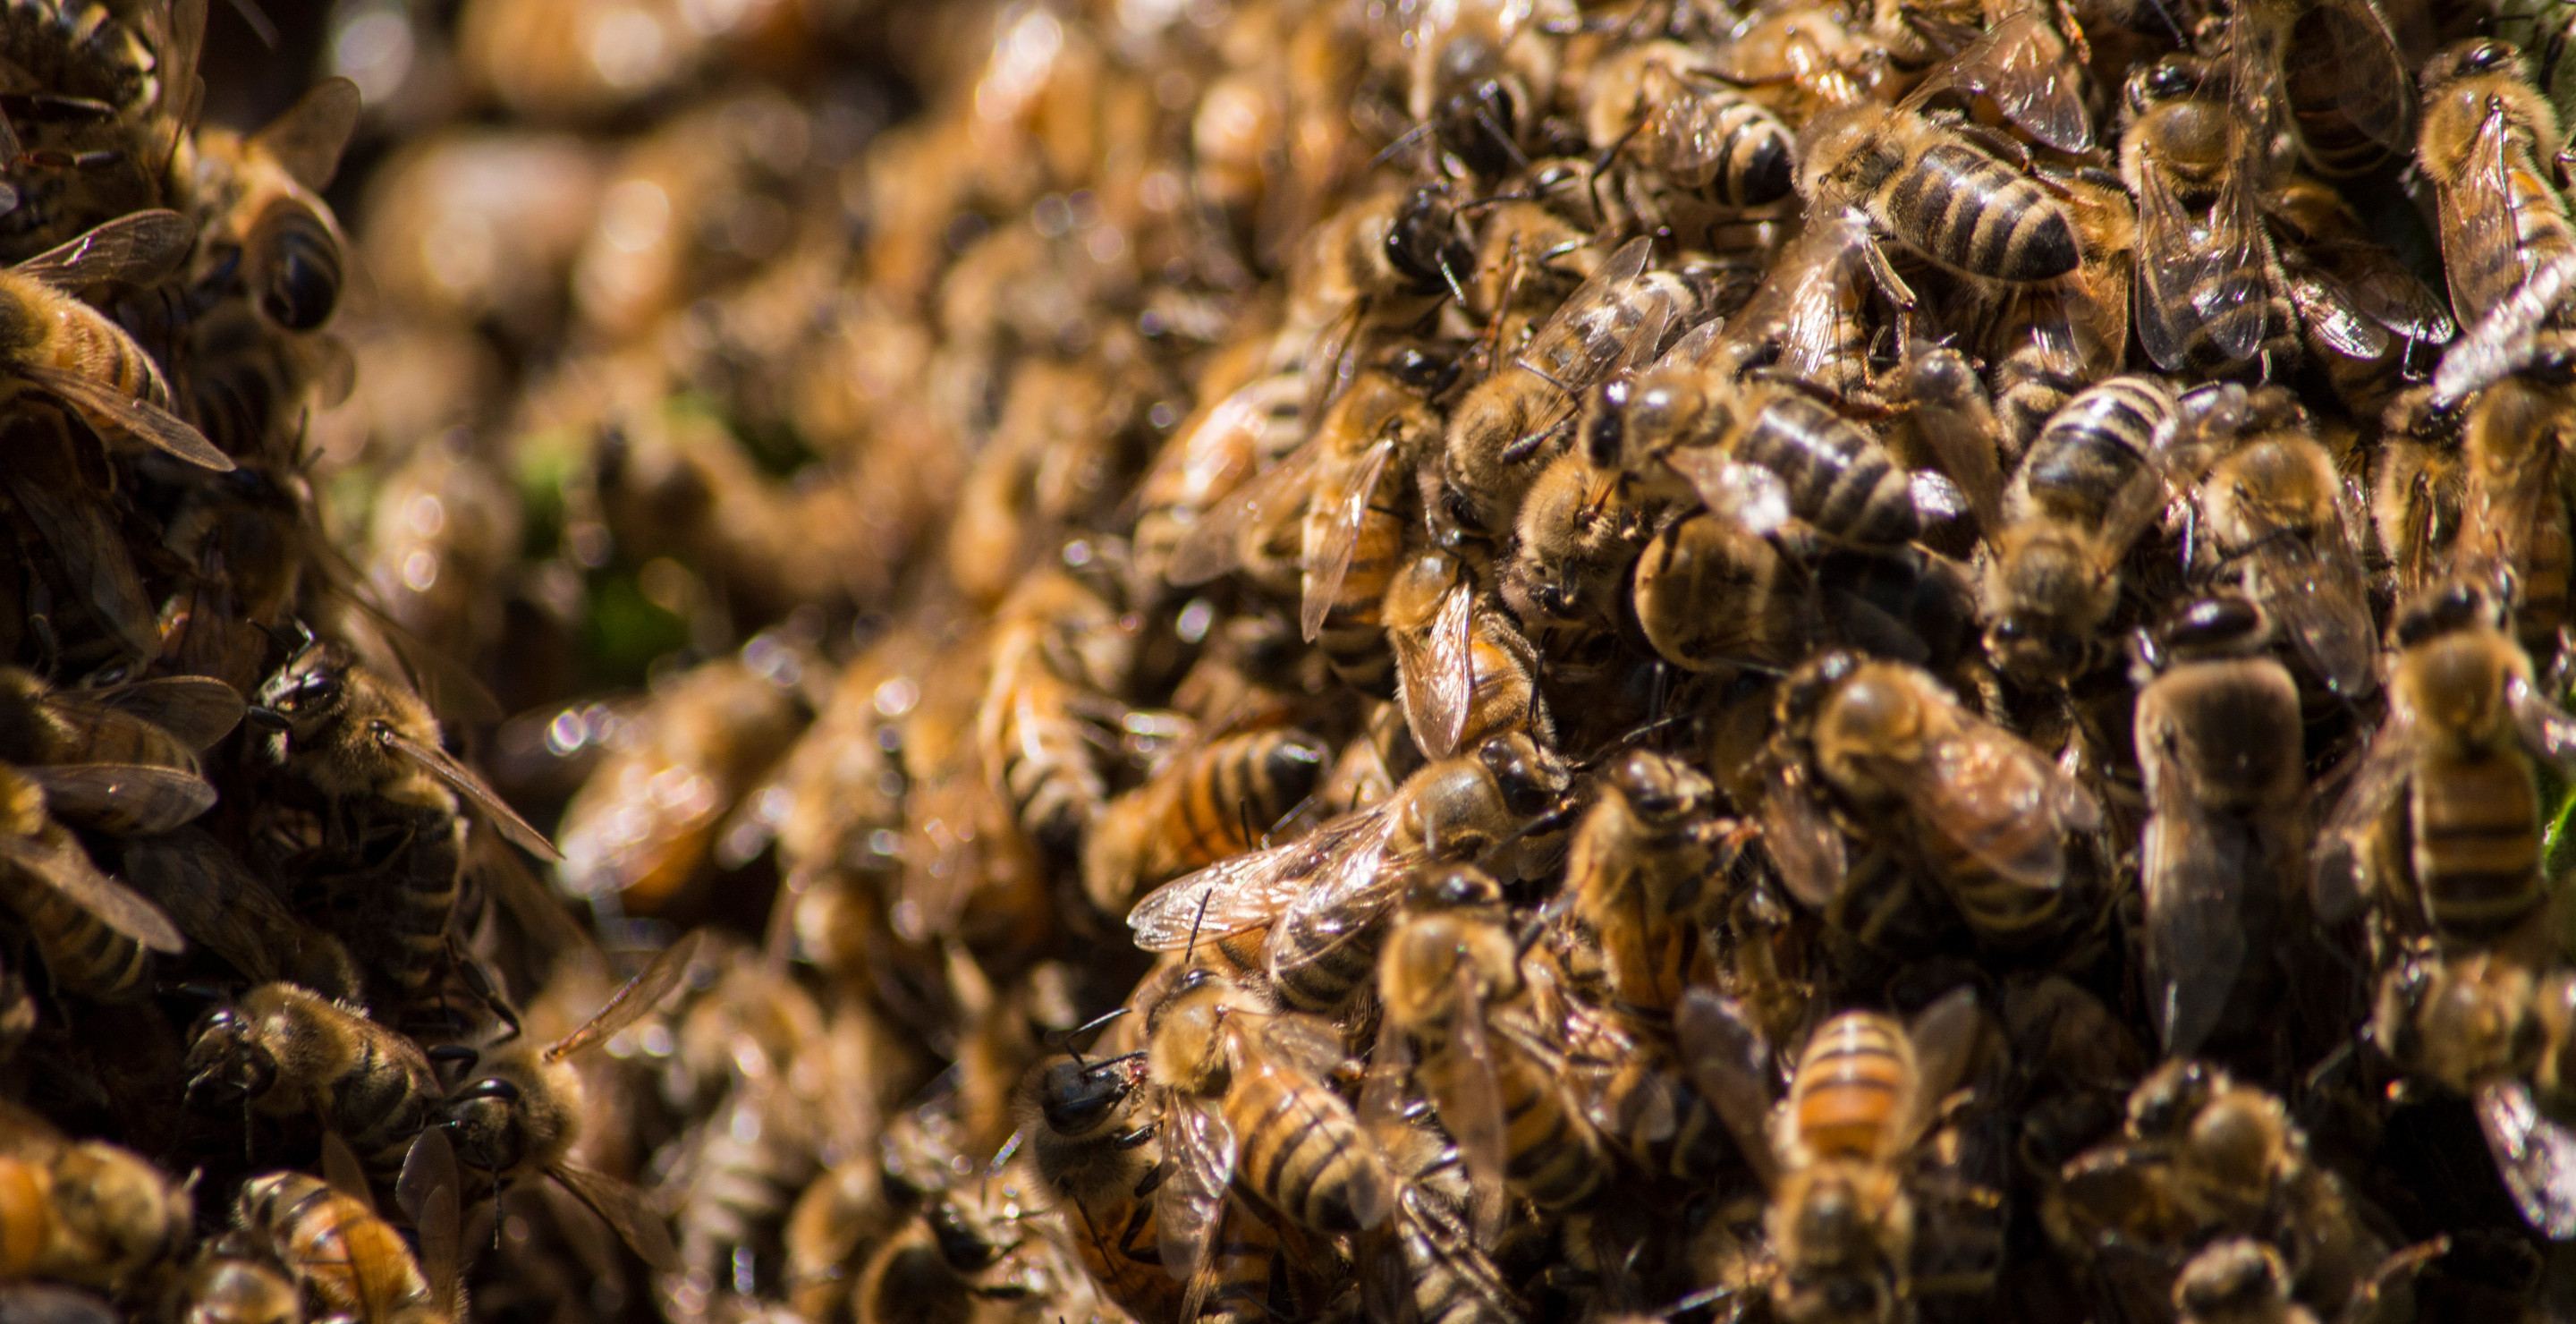 Arizona Man Dies After Being Attacked By Swarm Of Bees